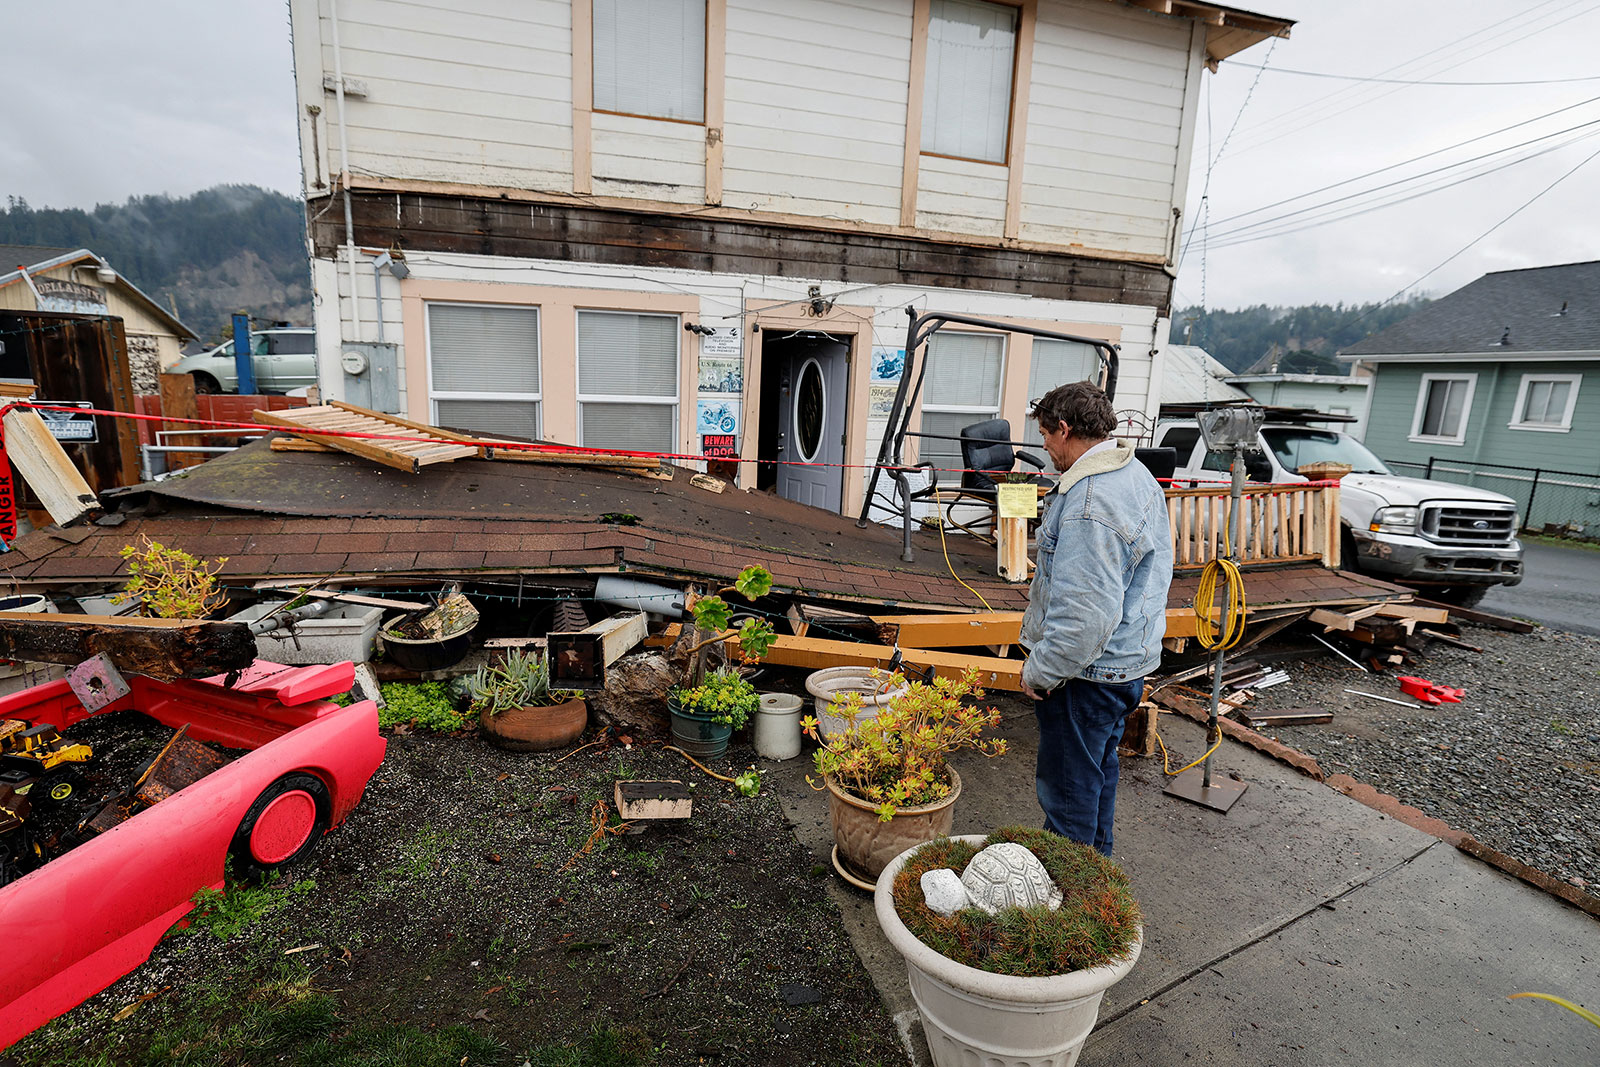 Darren Gallagher looks at the collapsed second story porch of his house after an earthquake struck off the coast of northern California, in Rio Dell on December 20.